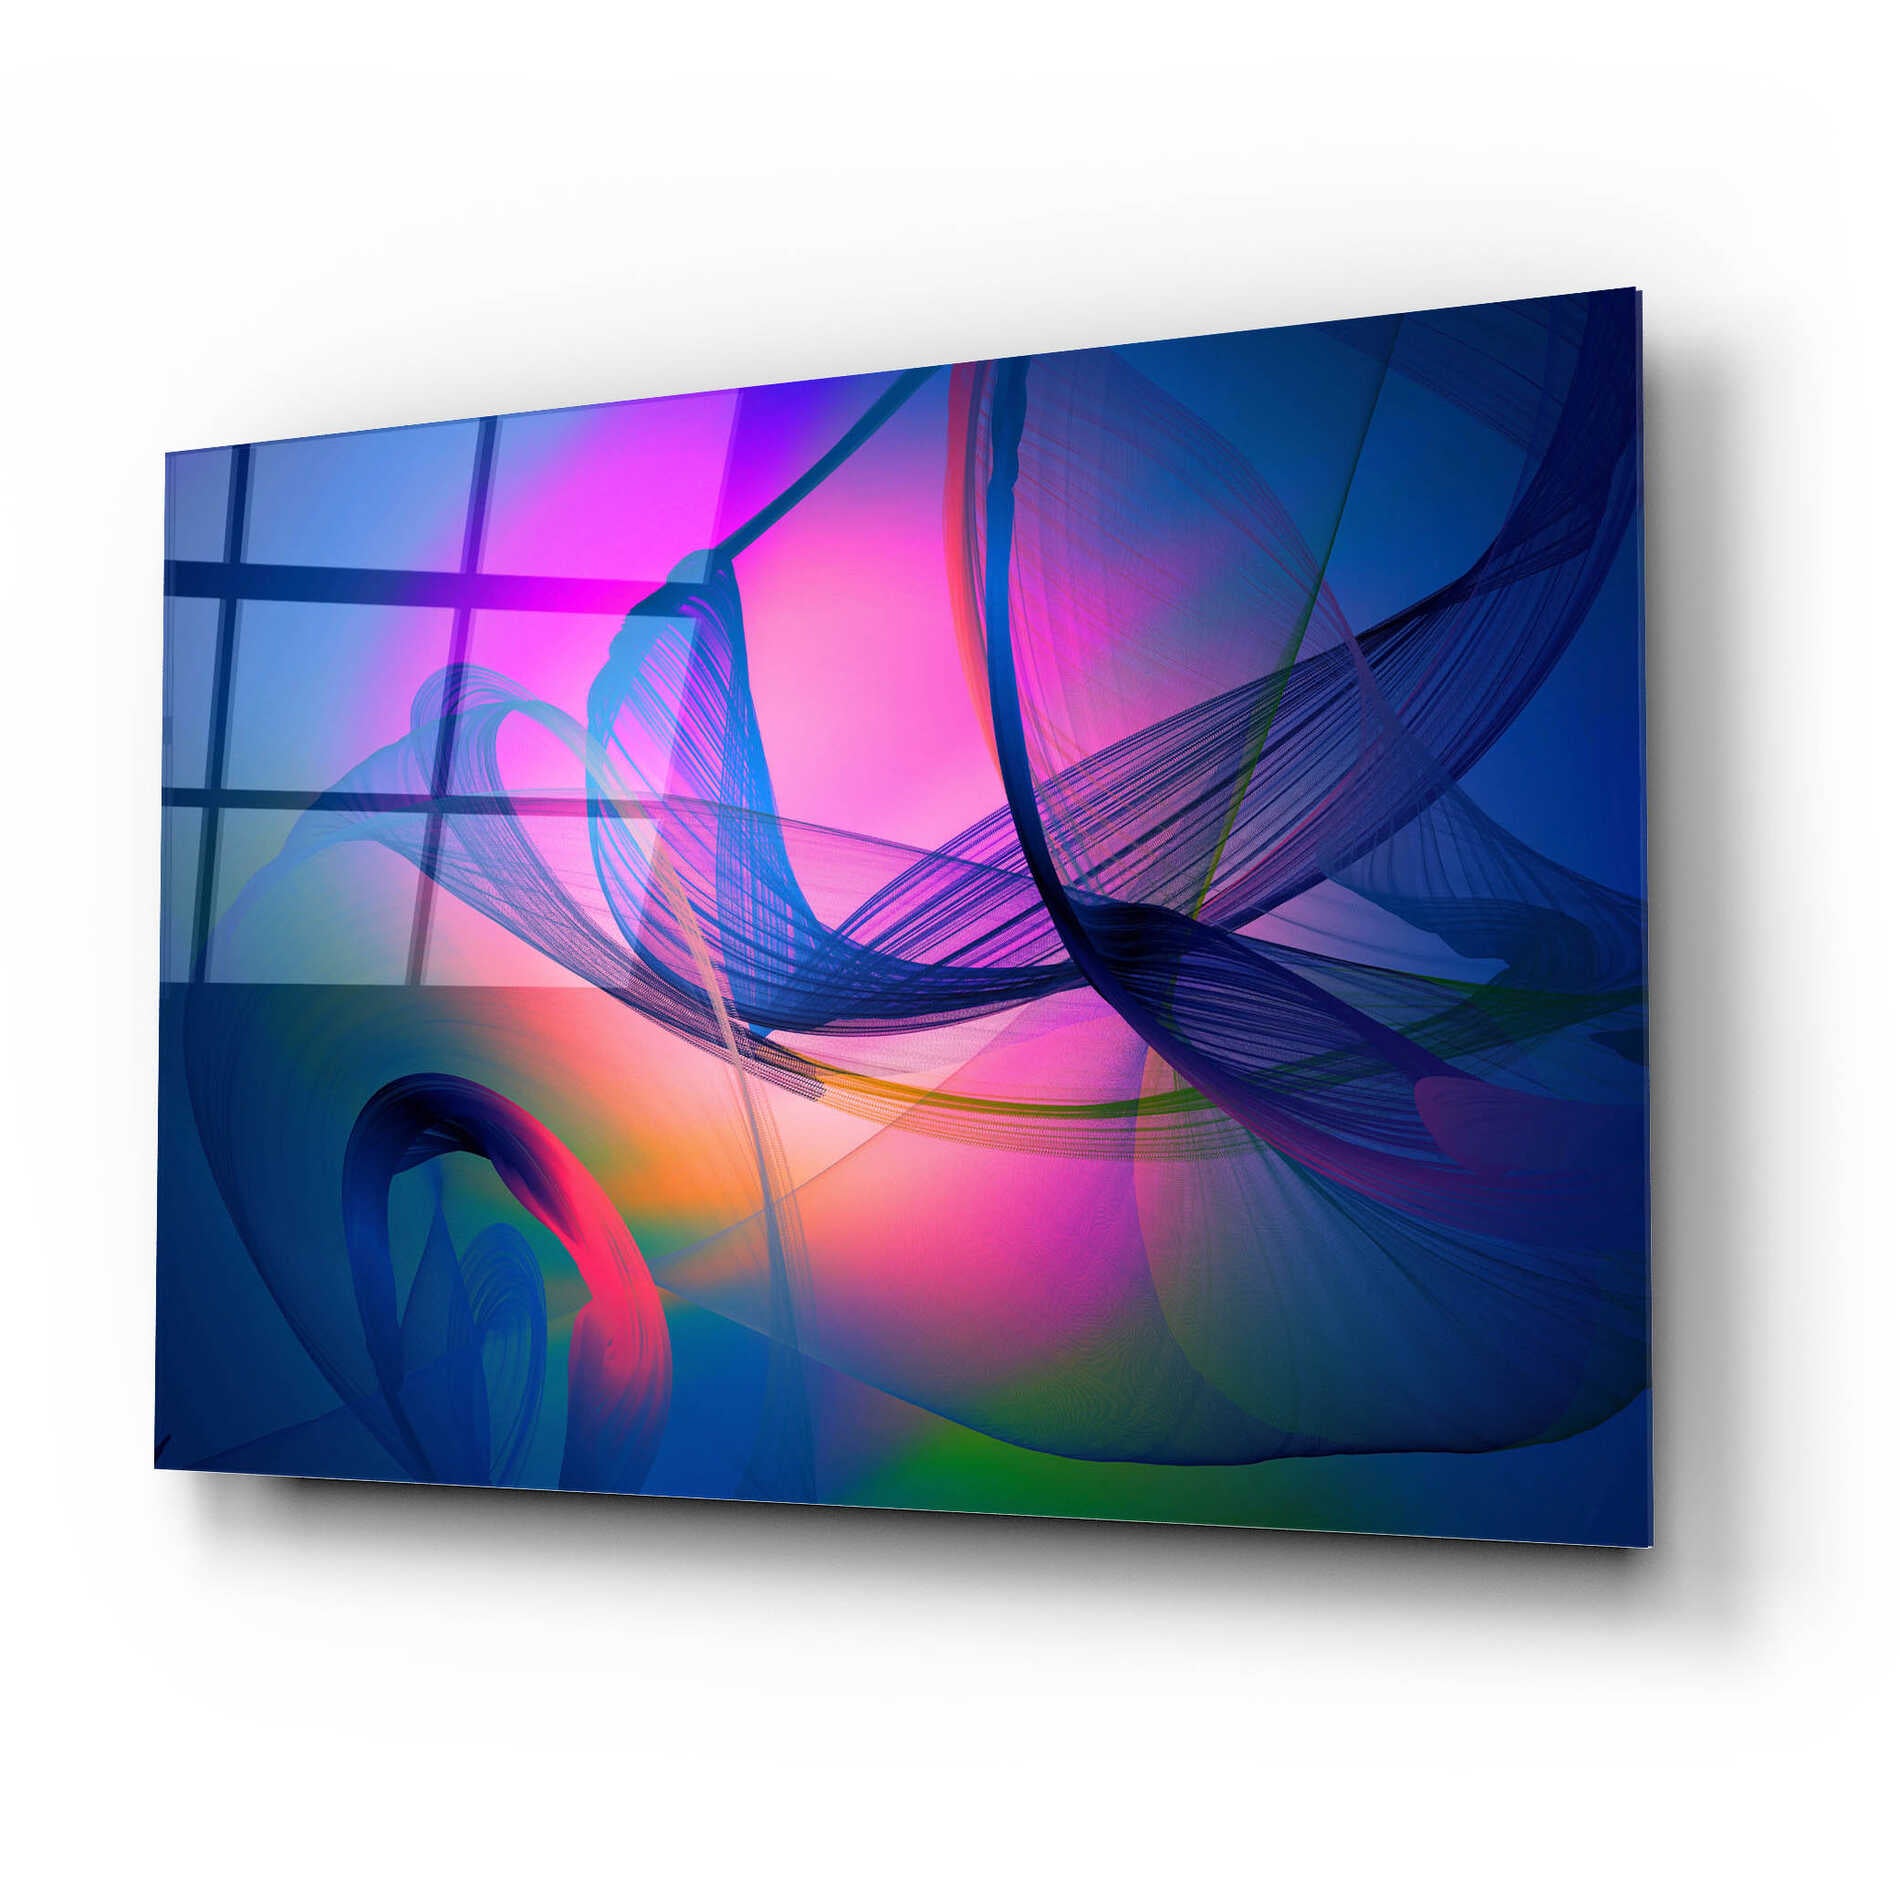 Epic Art 'Color In The Lines 31' by Irena Orlov, Acrylic Glass Wall Art,24x16